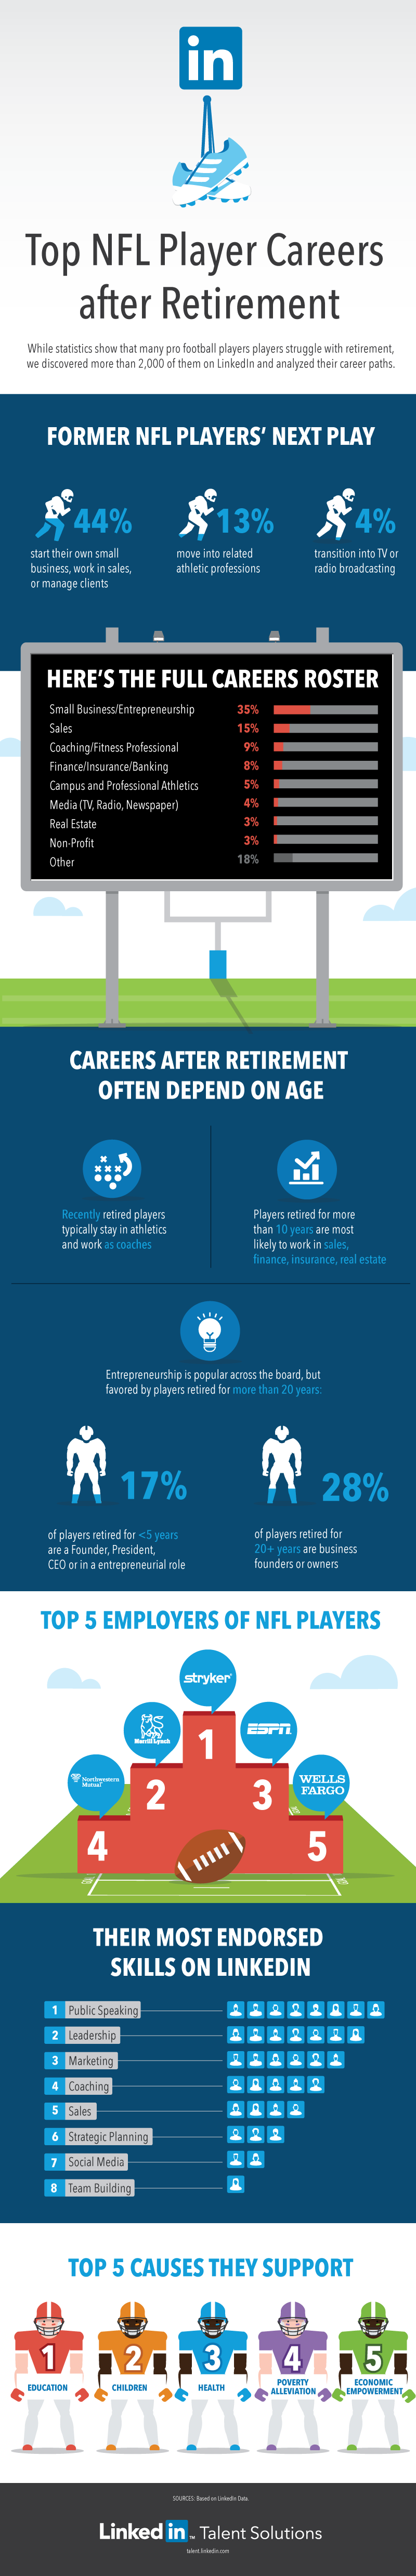 Top-NFL-Player-Careers-after-Retirement_infographic